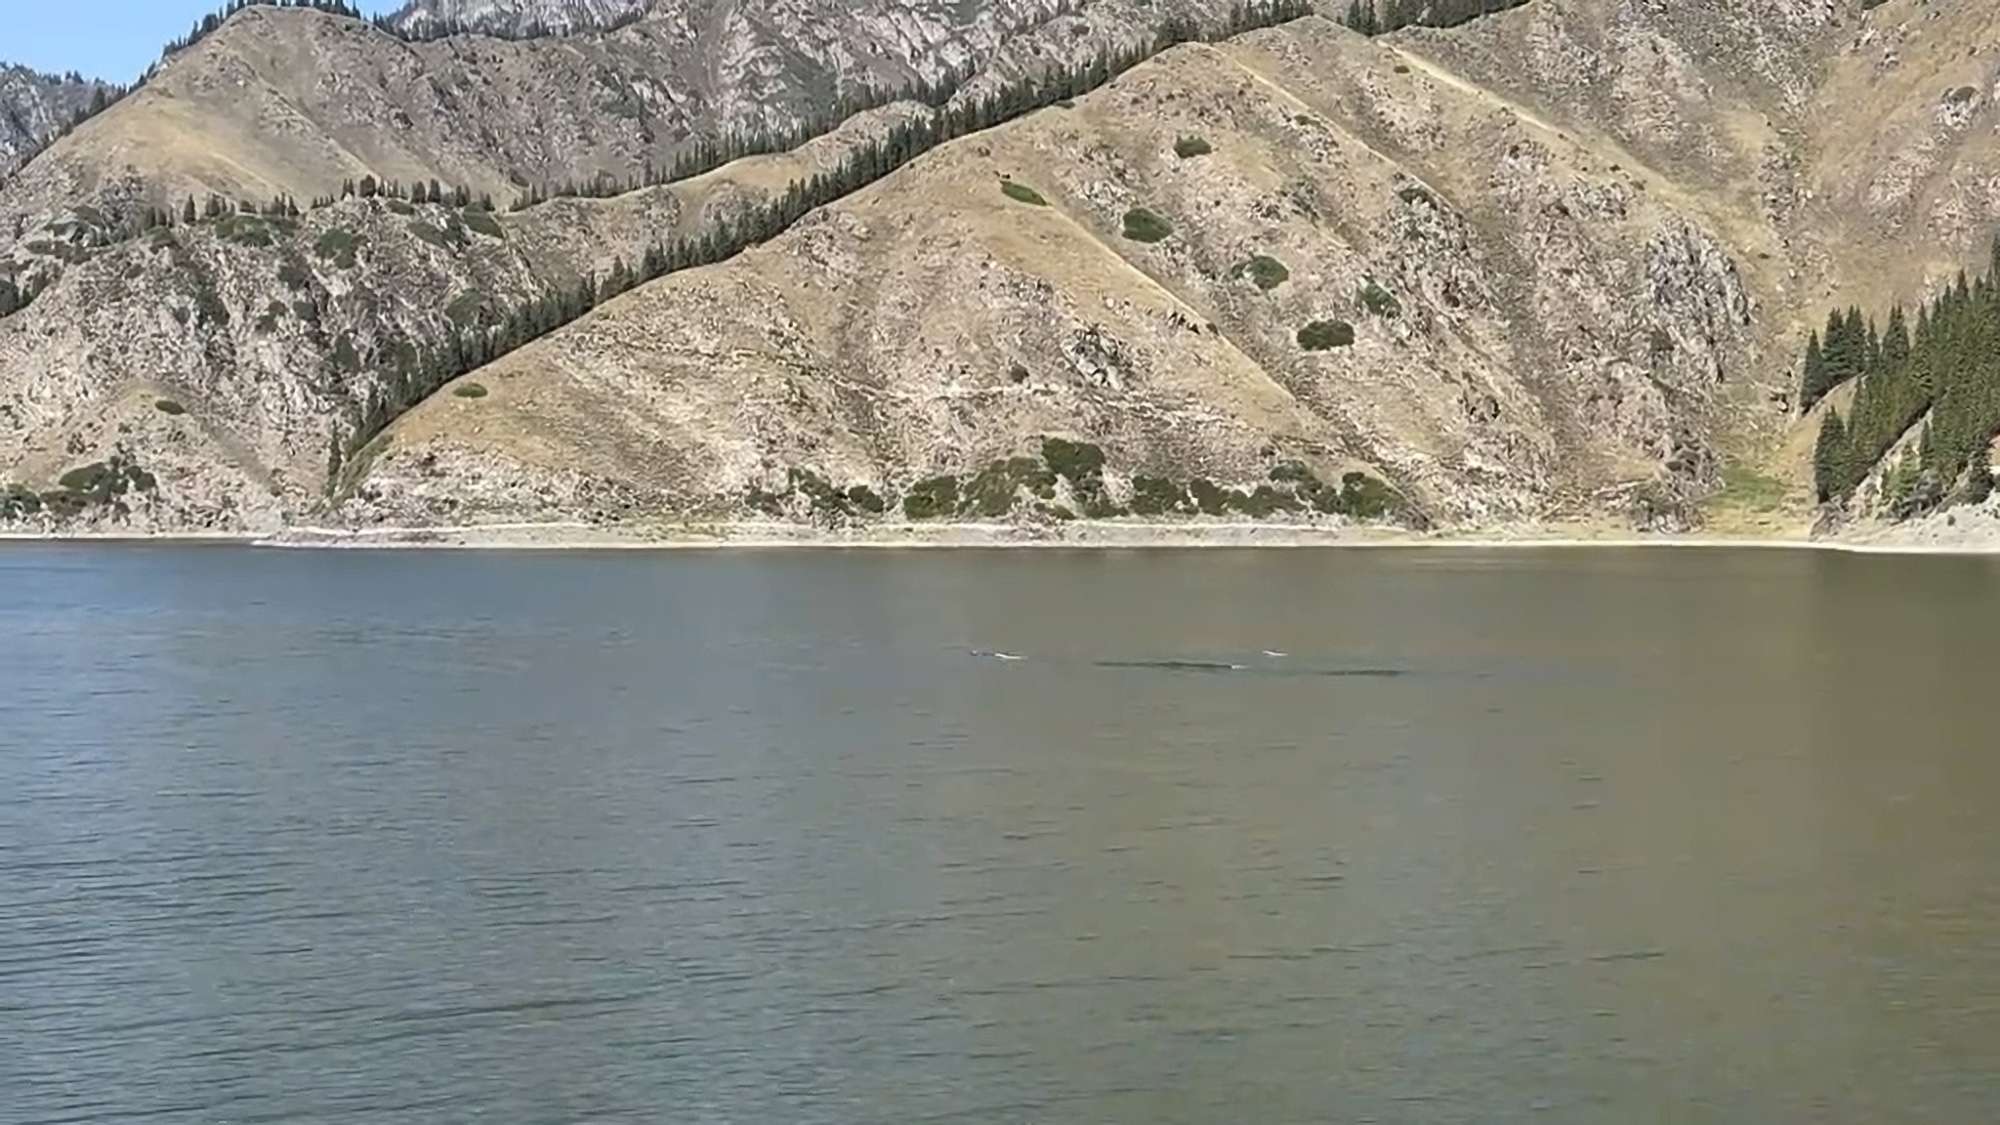 Woman Claims She Filmed A 50-Foot Silver Creature Swimming In Lake